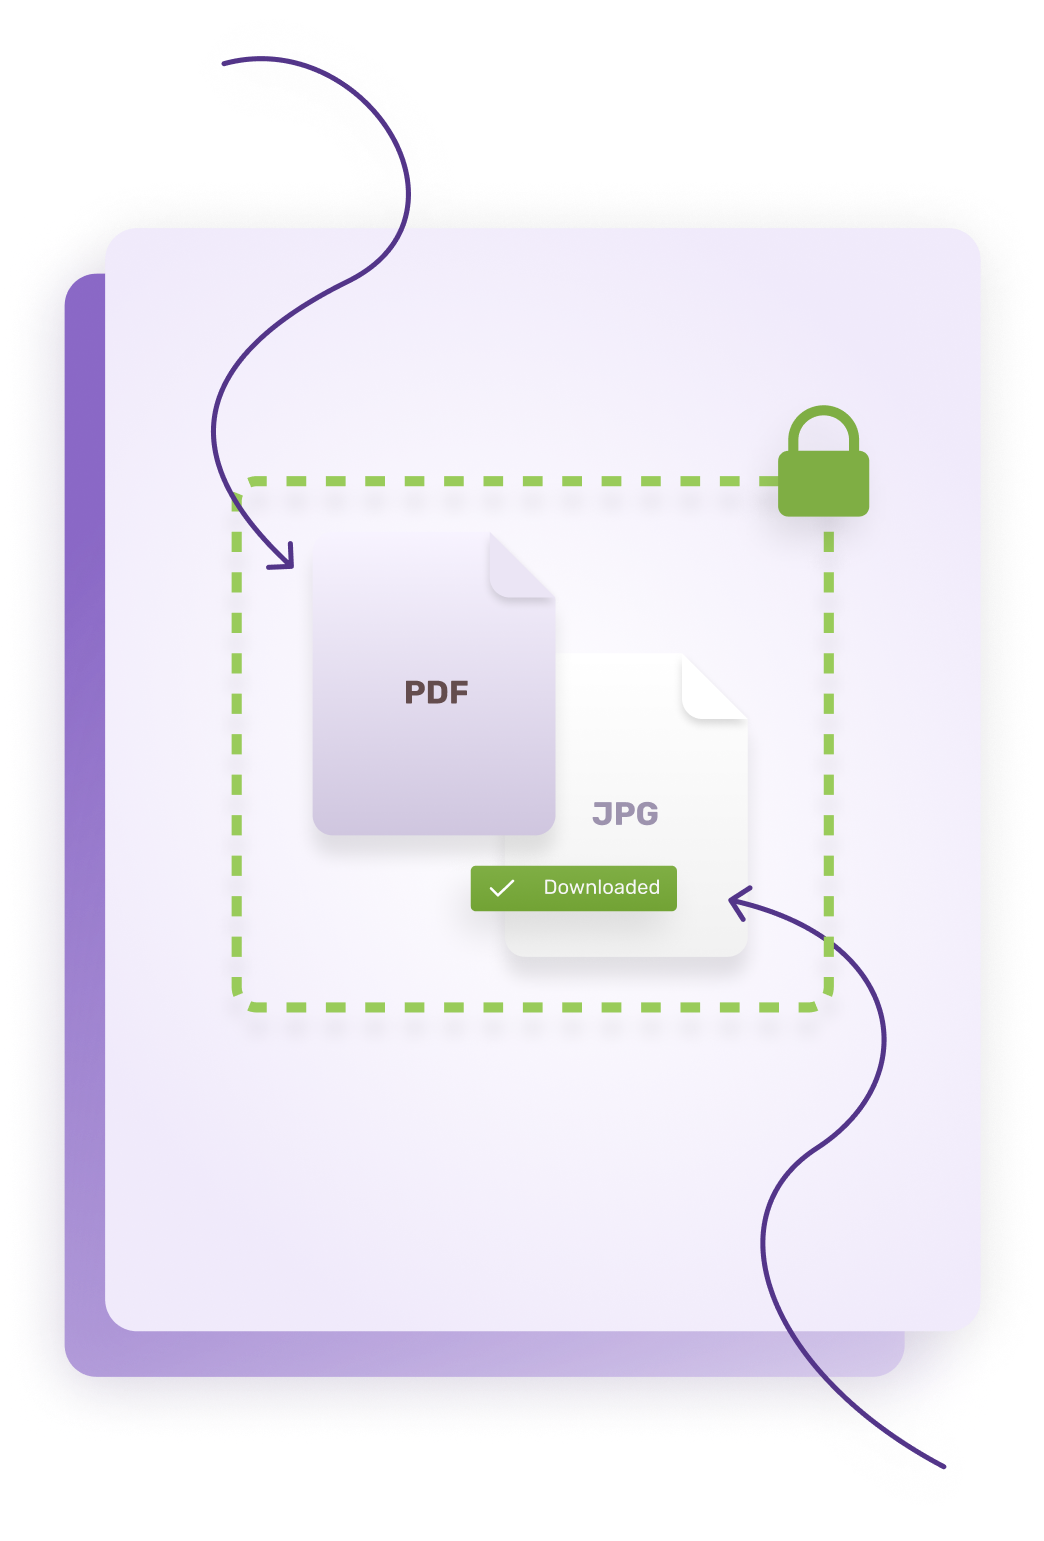 Illustration showing files being shared inside an encrypted zone